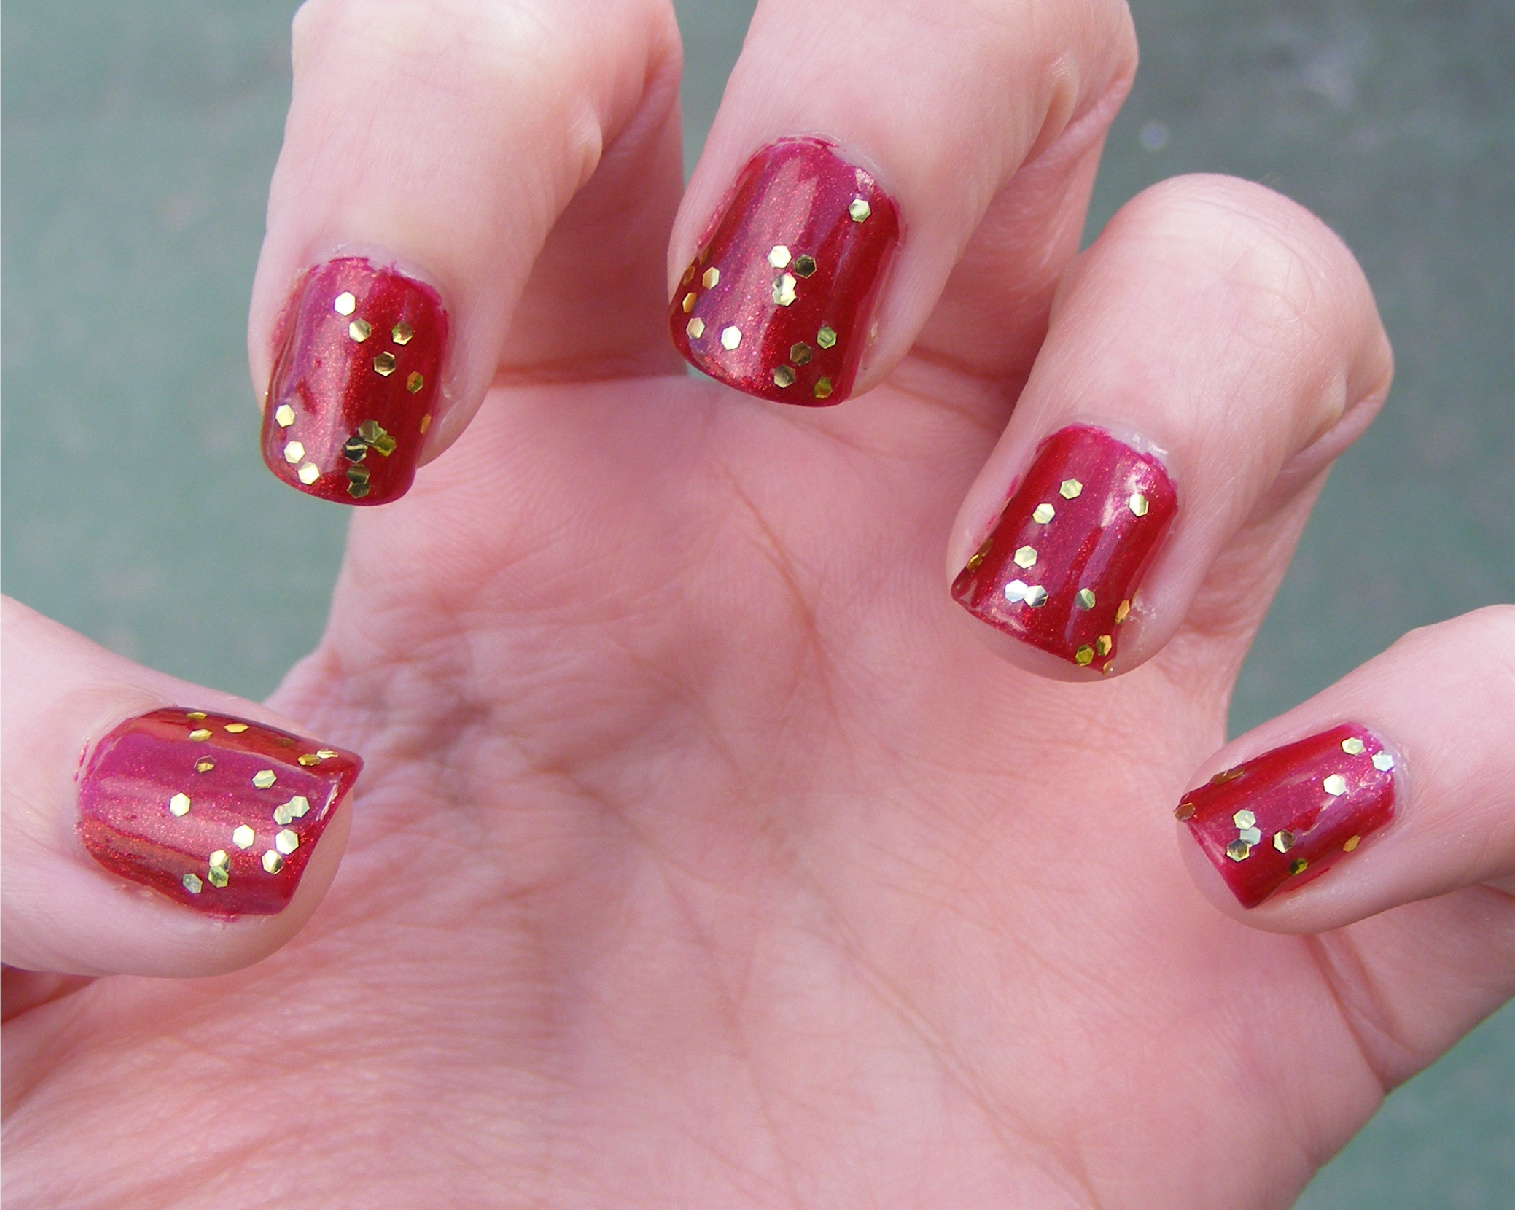 Nails Of The Day (NOTD): Golden chunks